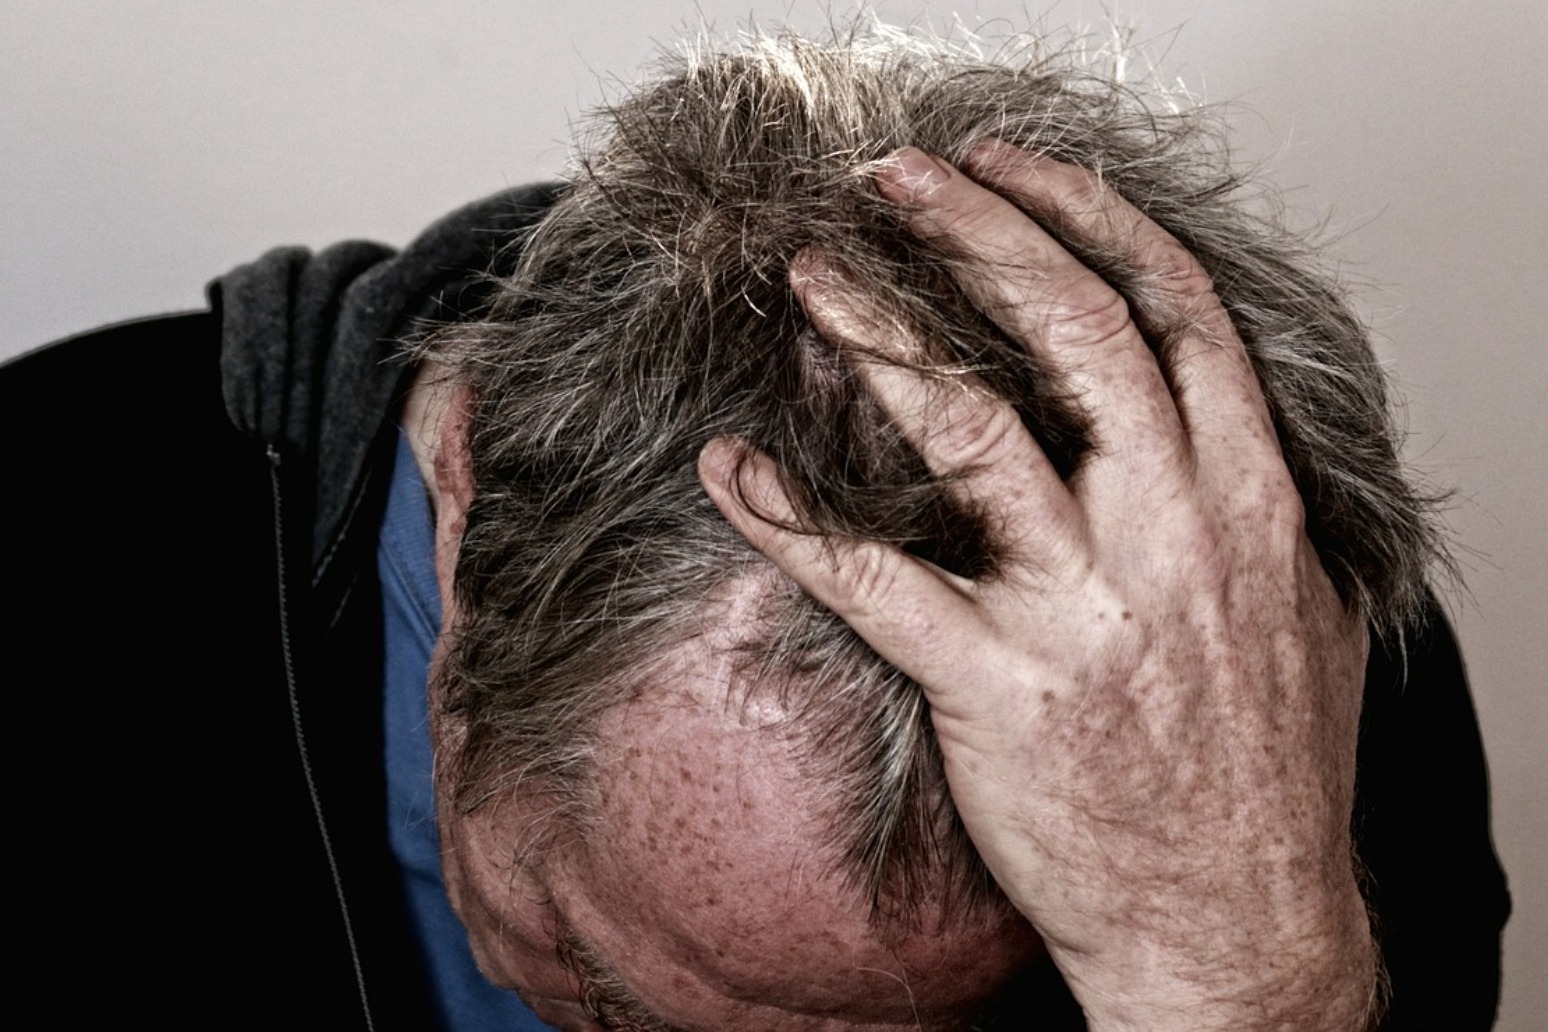 Global estimates of headaches suggest disorder impacts more than 50% of people 